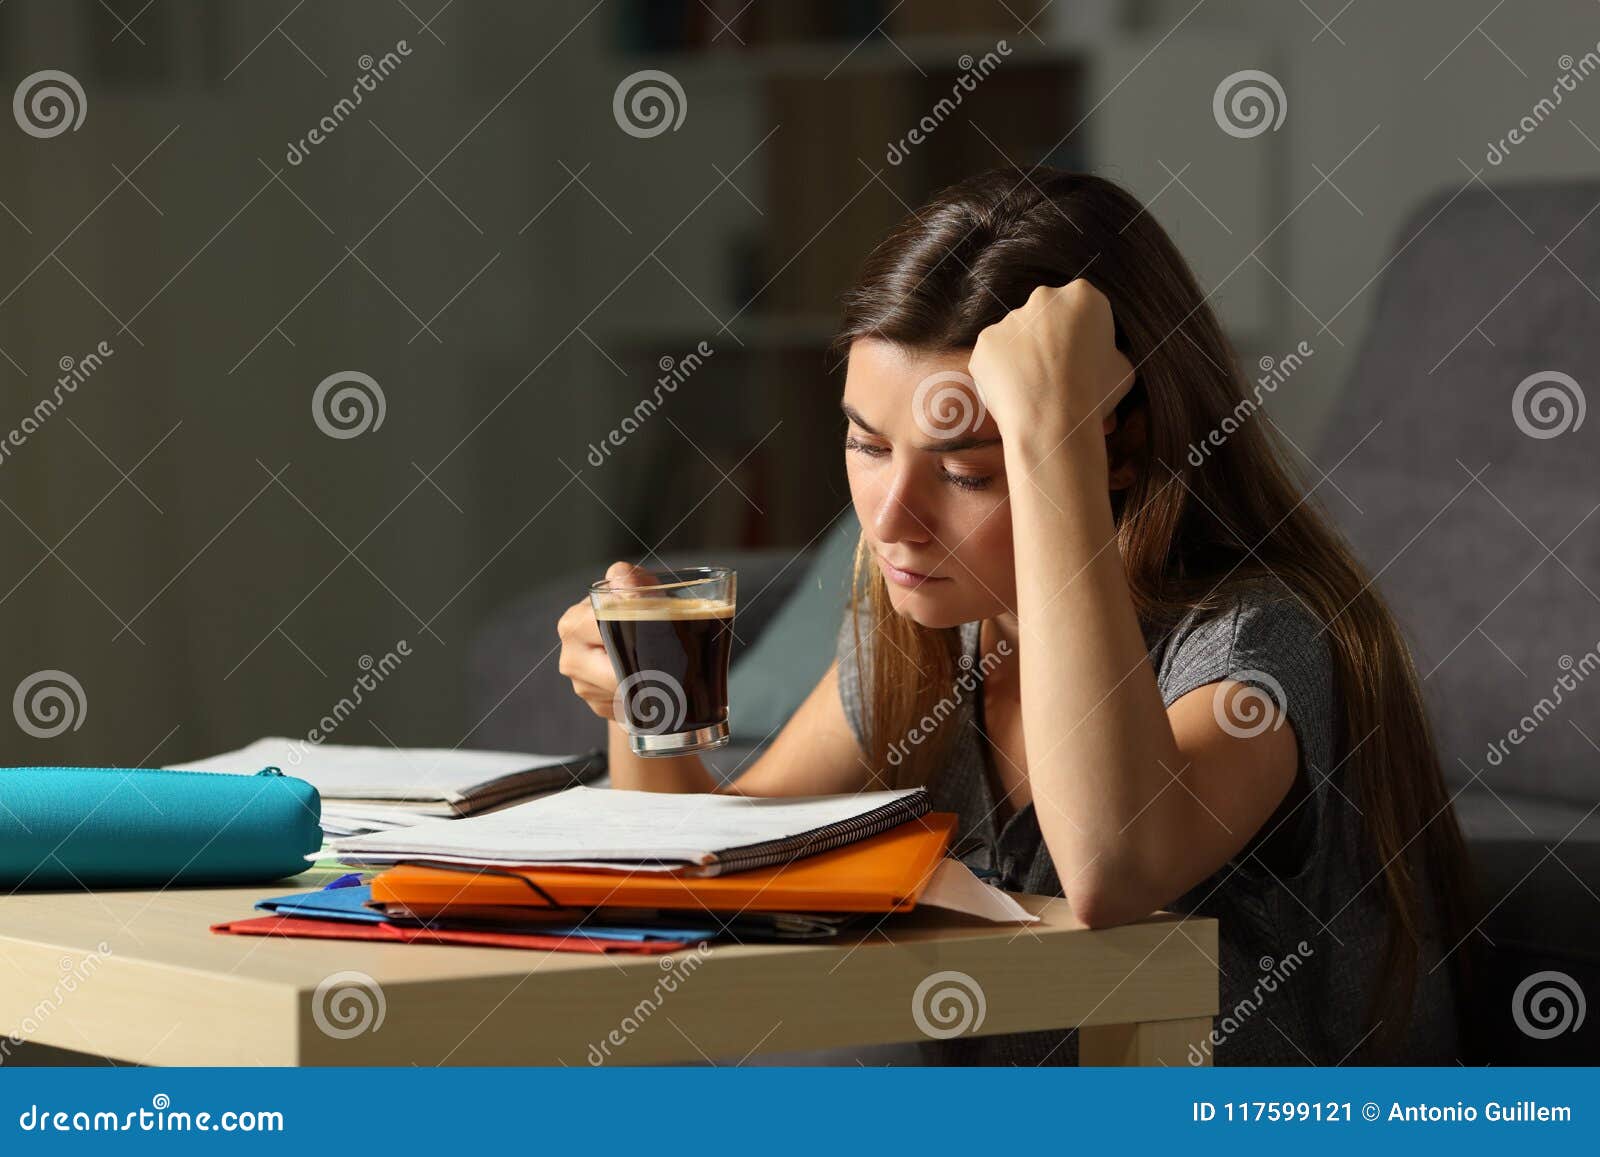 tired student studying late hours drinking coffee